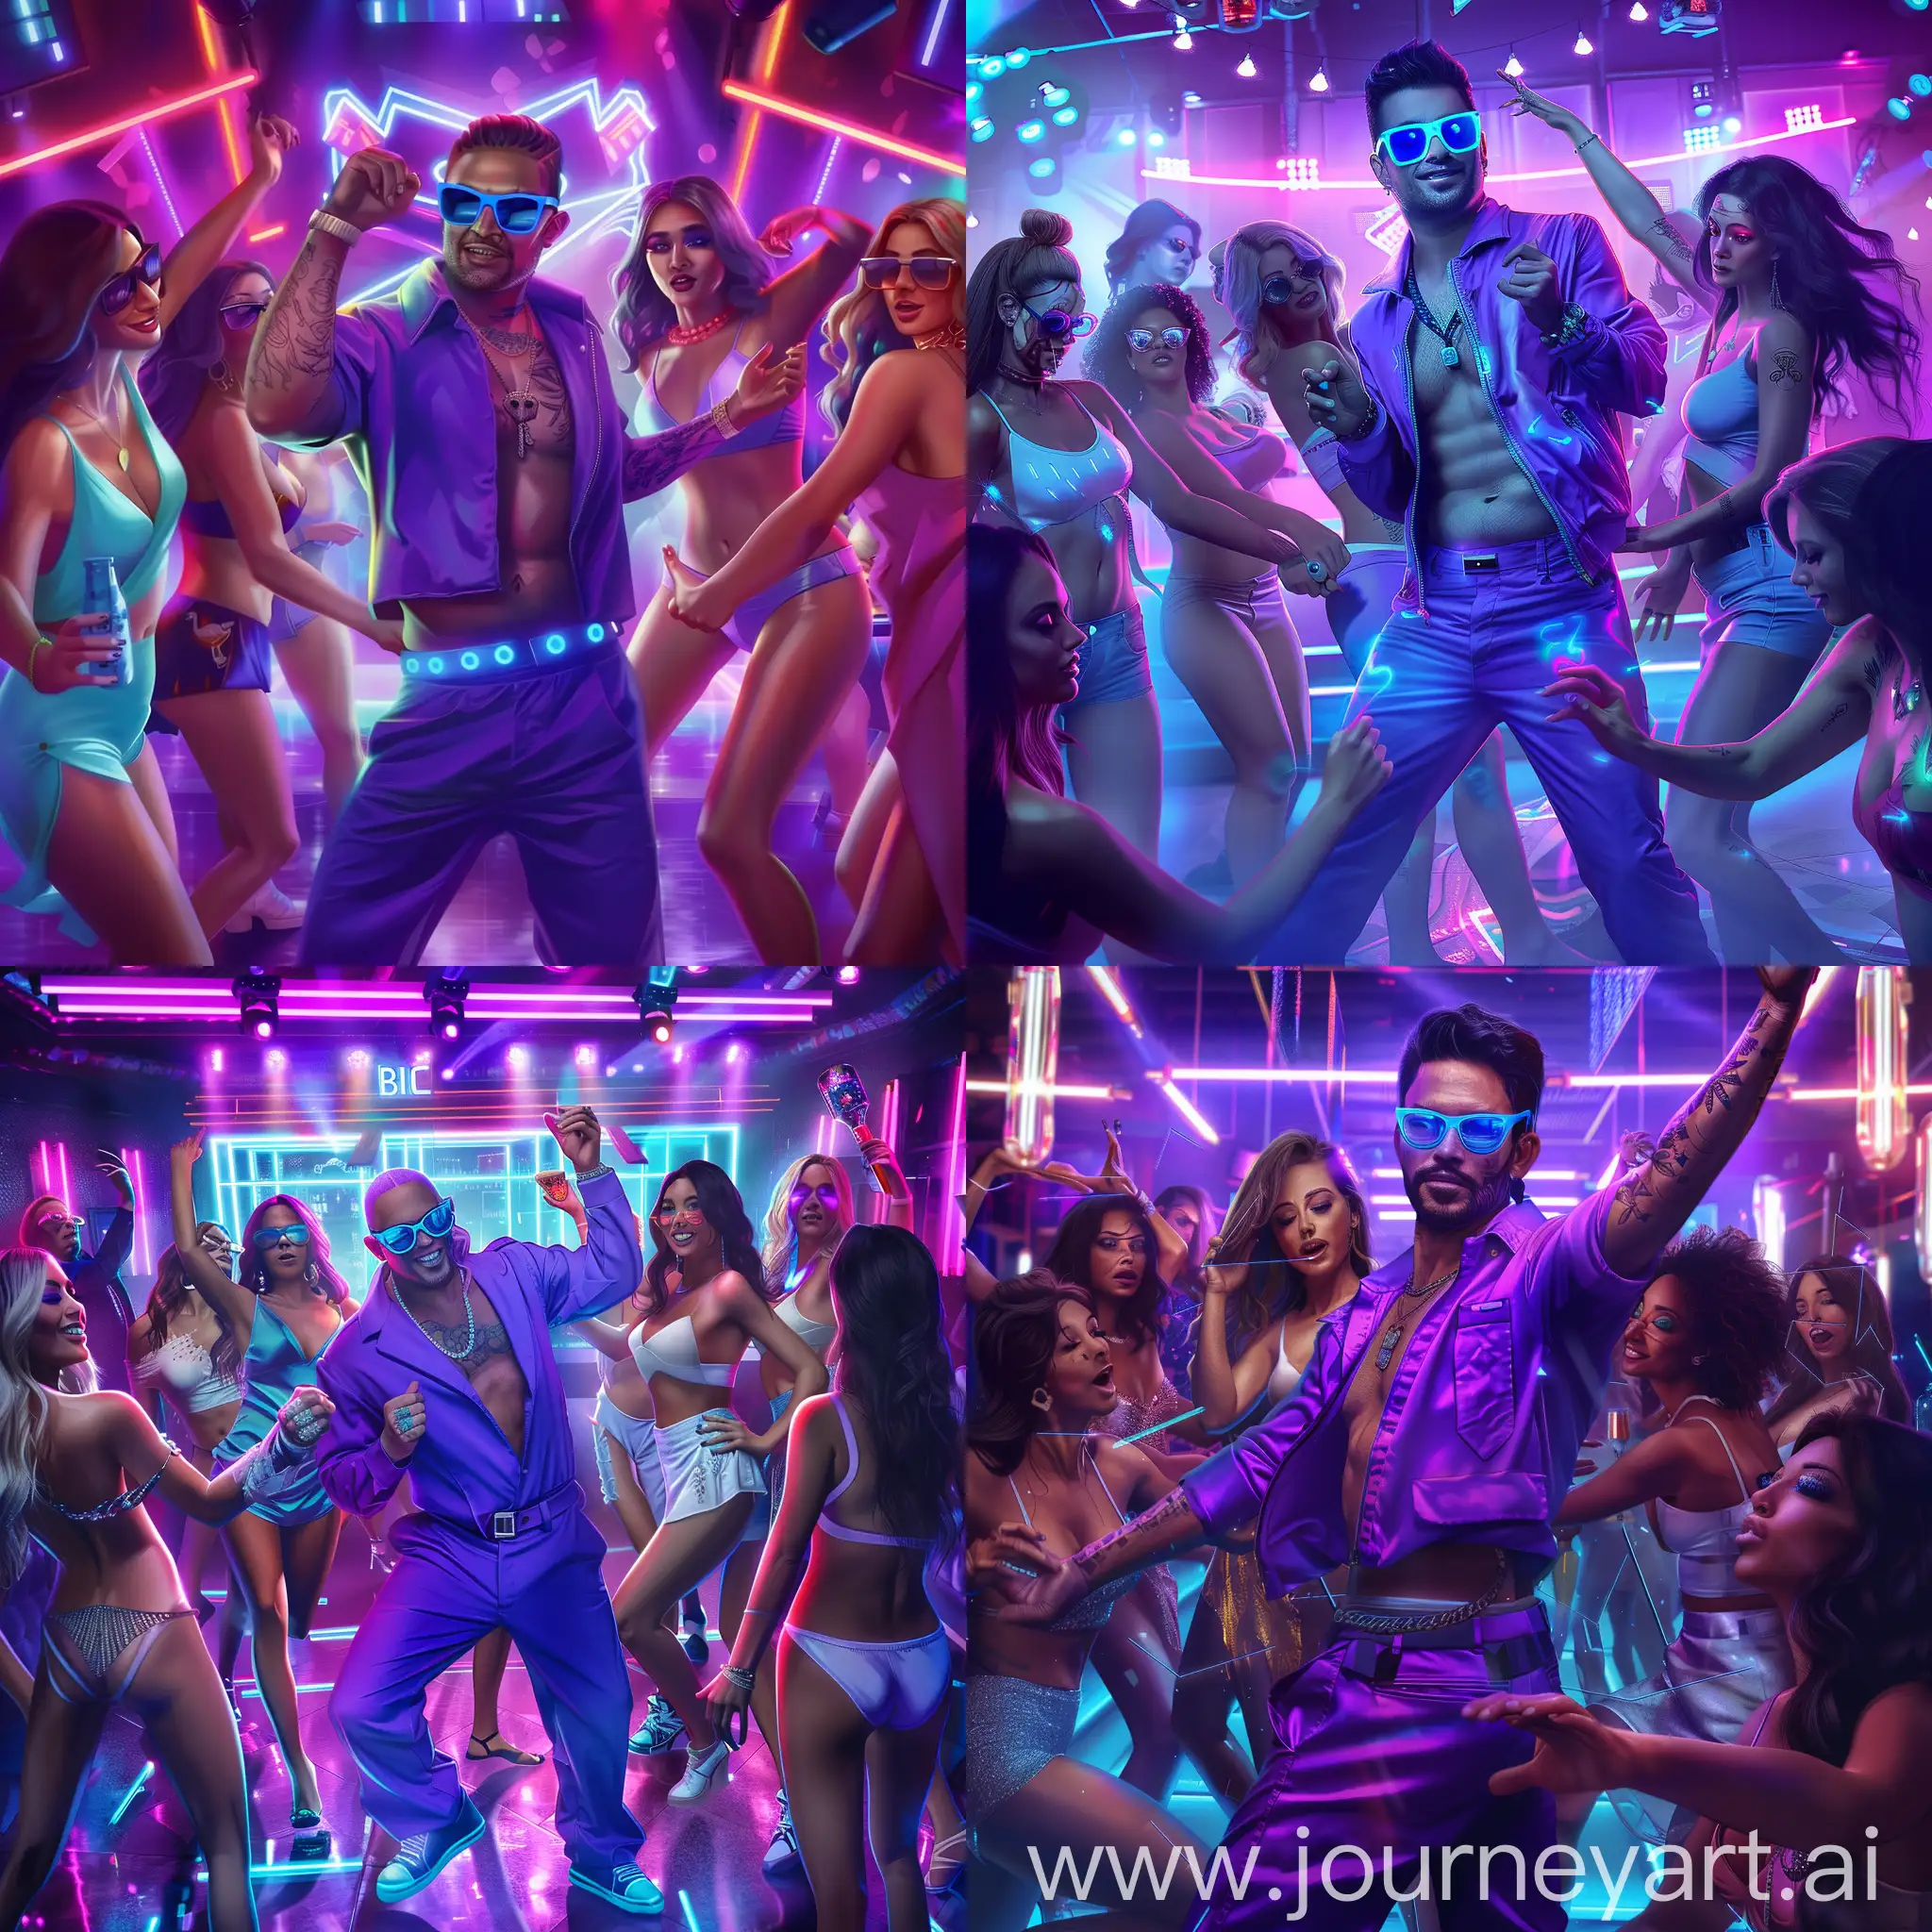 Vibrant-Purple-Bouncer-with-Blue-Glasses-Dancing-Amidst-Women-in-Neonlit-Nightclub